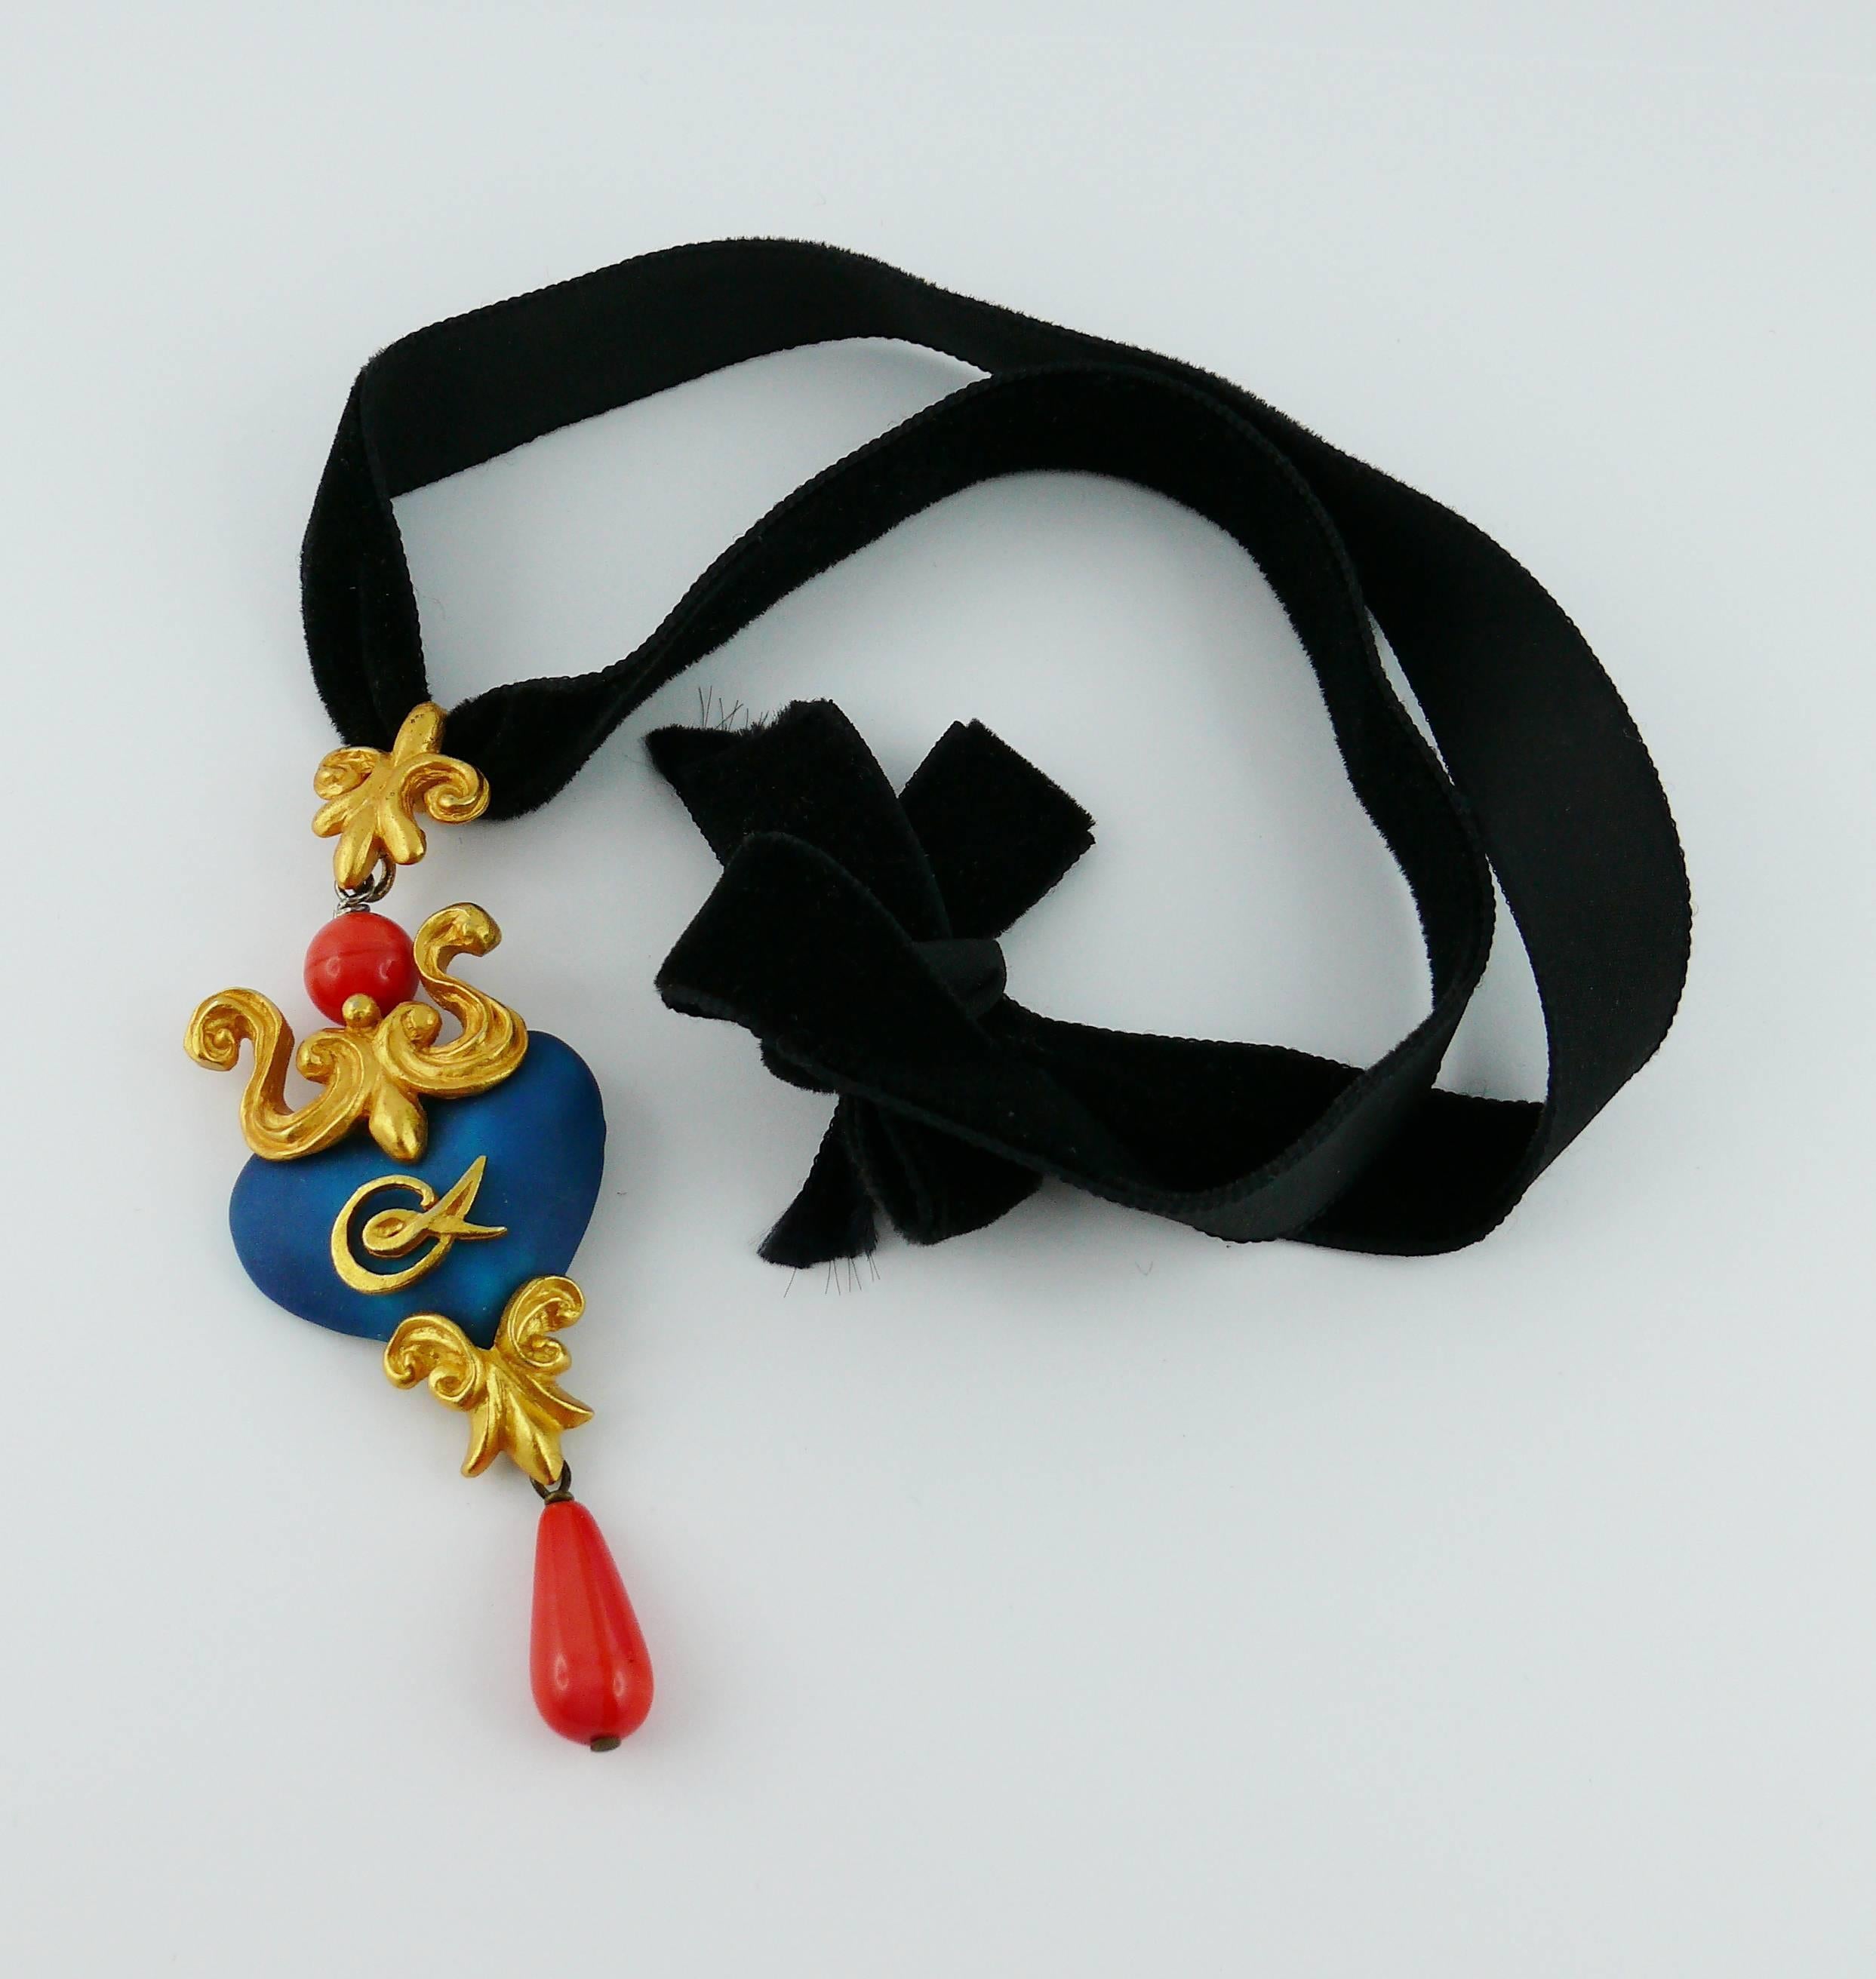 CHRISTIAN LACROIX vintage pendant necklace featuring a gorgeous Baroque enameled heart adorned with gold tone elements and faux coral beads.

Black velvet ribbon rope.

CL monogram on heart front.

Indicative measurements : length worn approx.